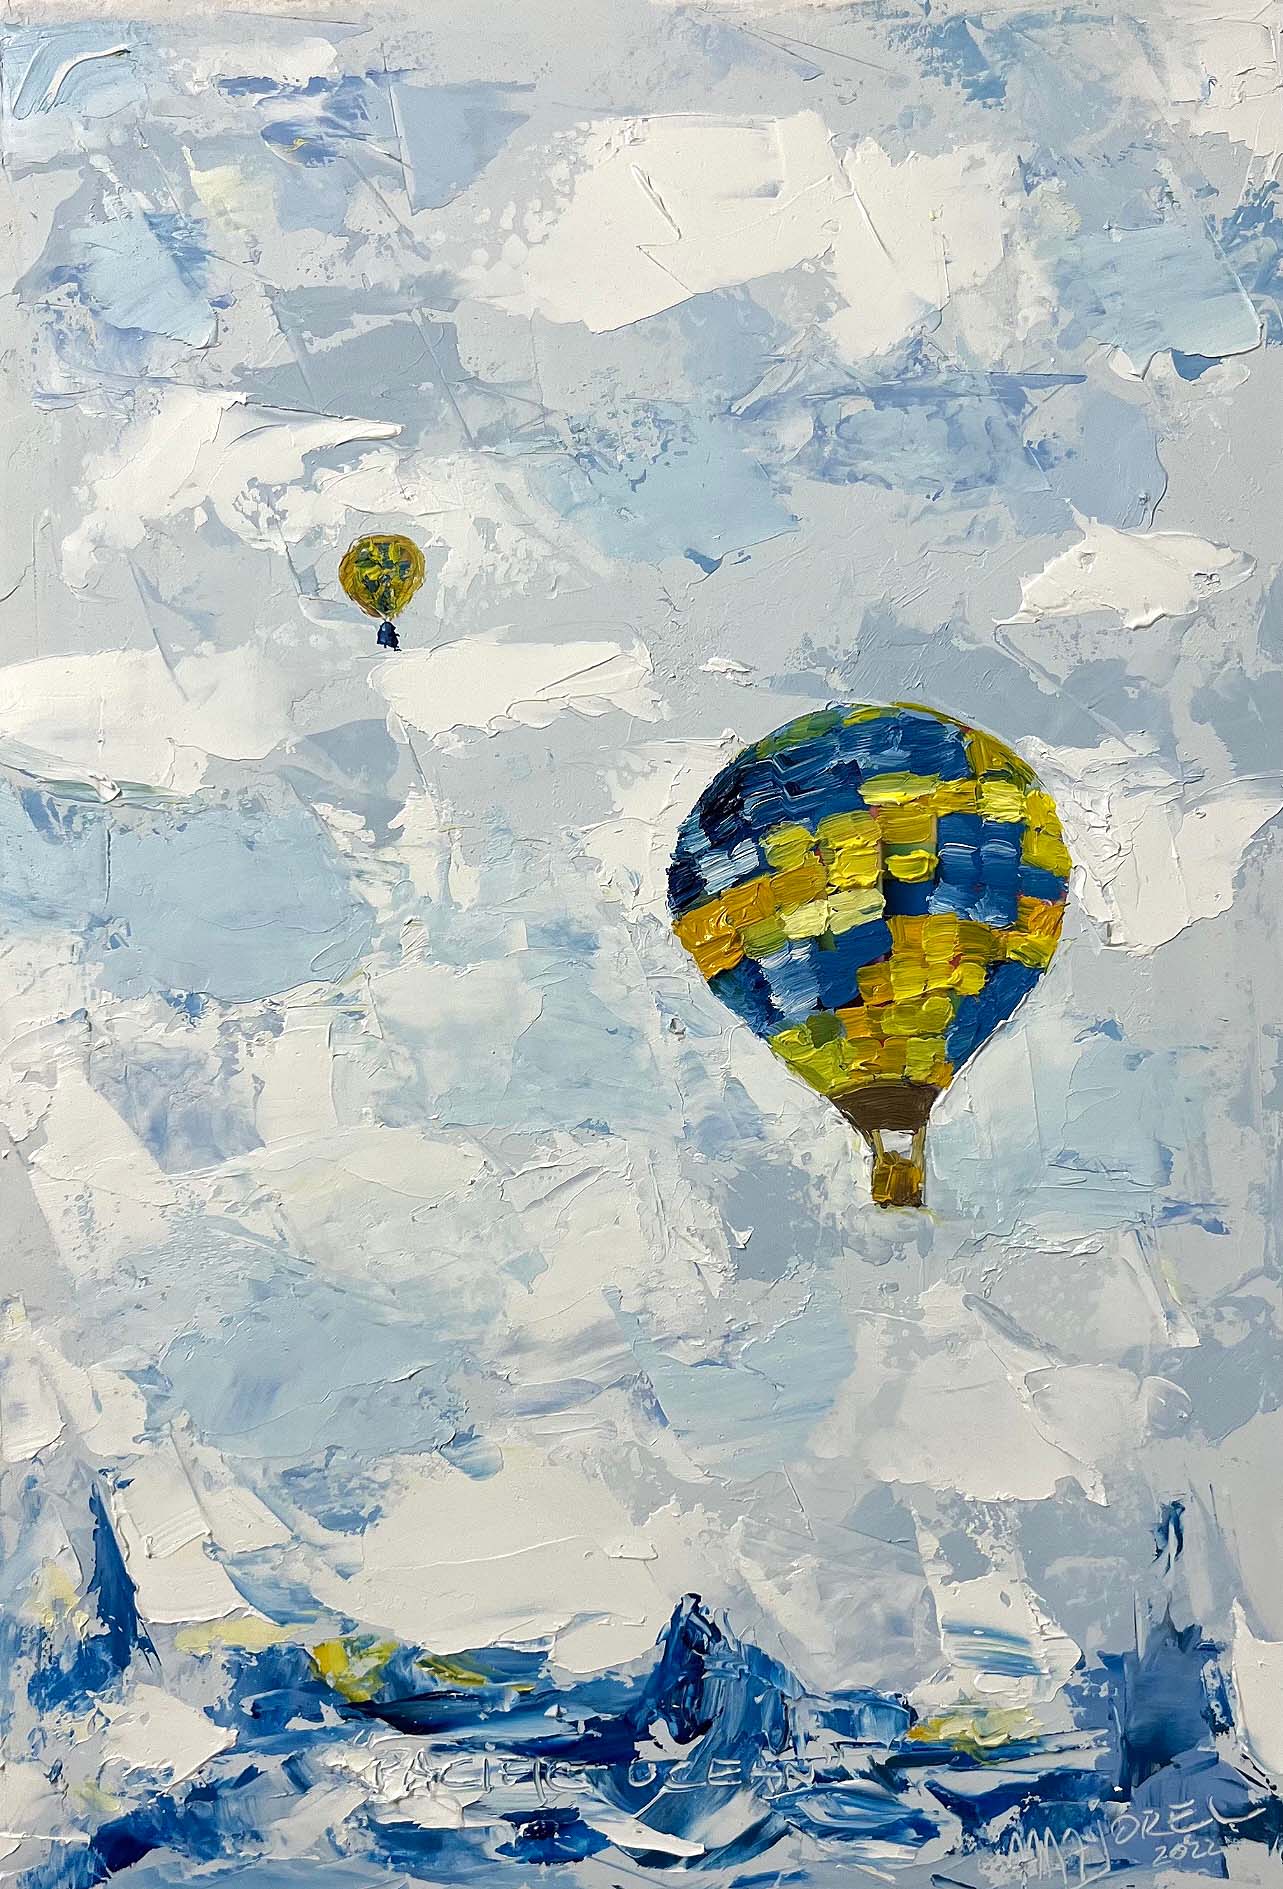 Argentinian artist Aurelia Majorel’s blue and yellow hot air balloon painting “Pacific Ocean,” 2022, Oil on paper, 16 x 12 inches, on display and available at the Ritz Carlton Miami Beach